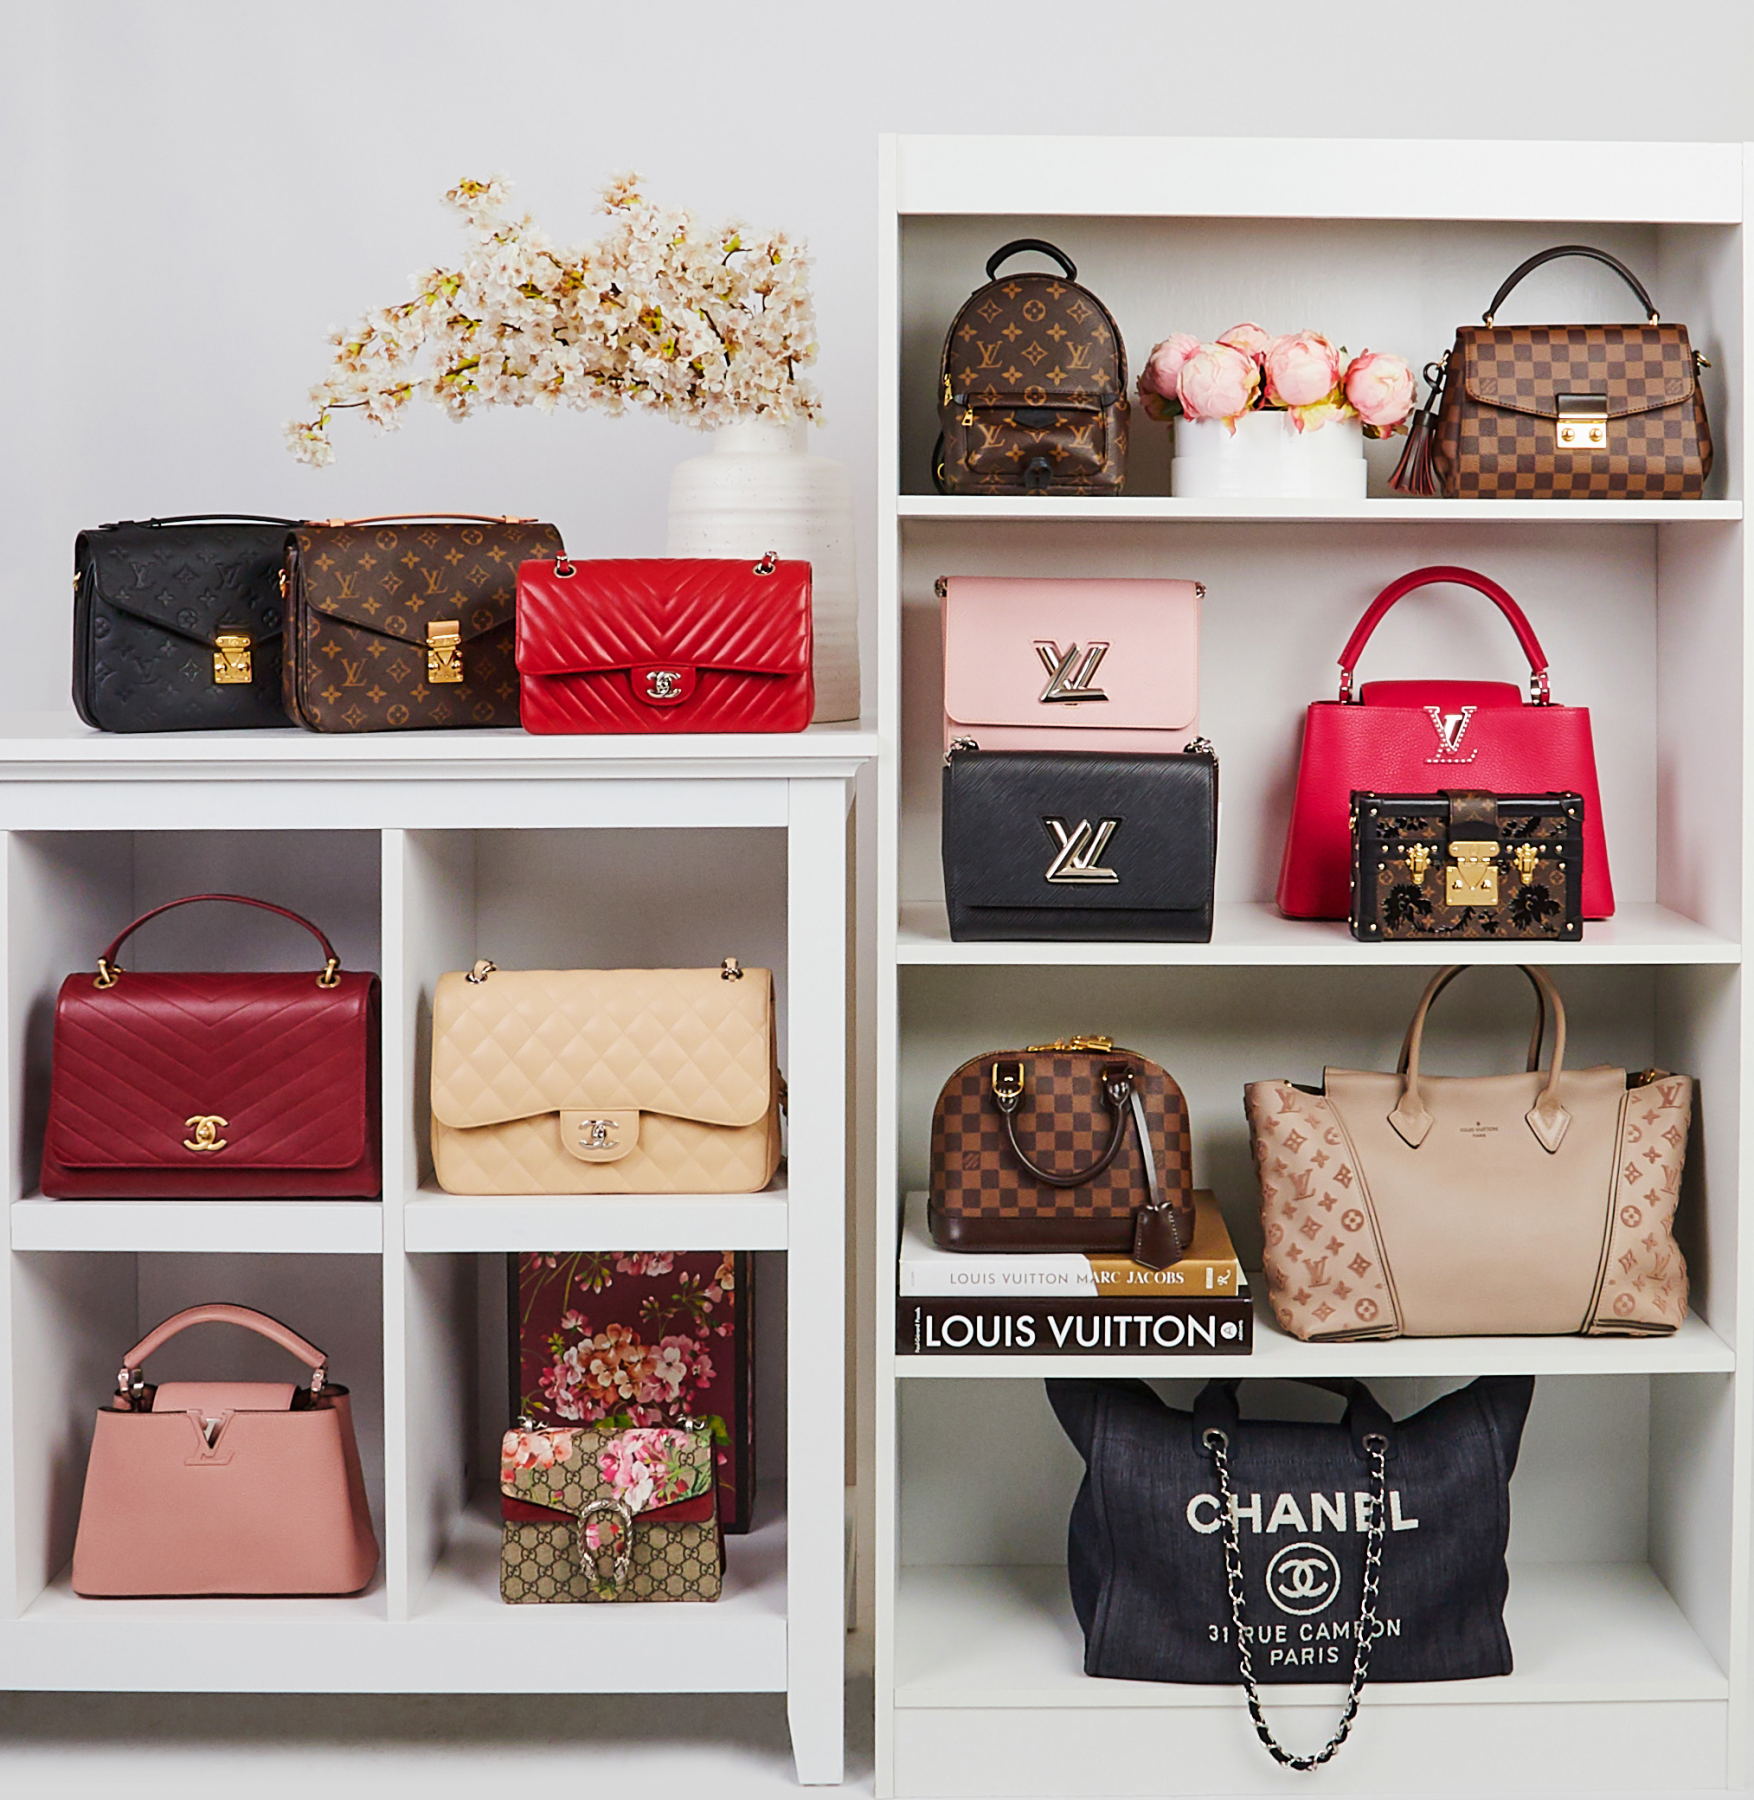 Ranking ALL luxury bag brands from low to ULTRA luxury #luxury